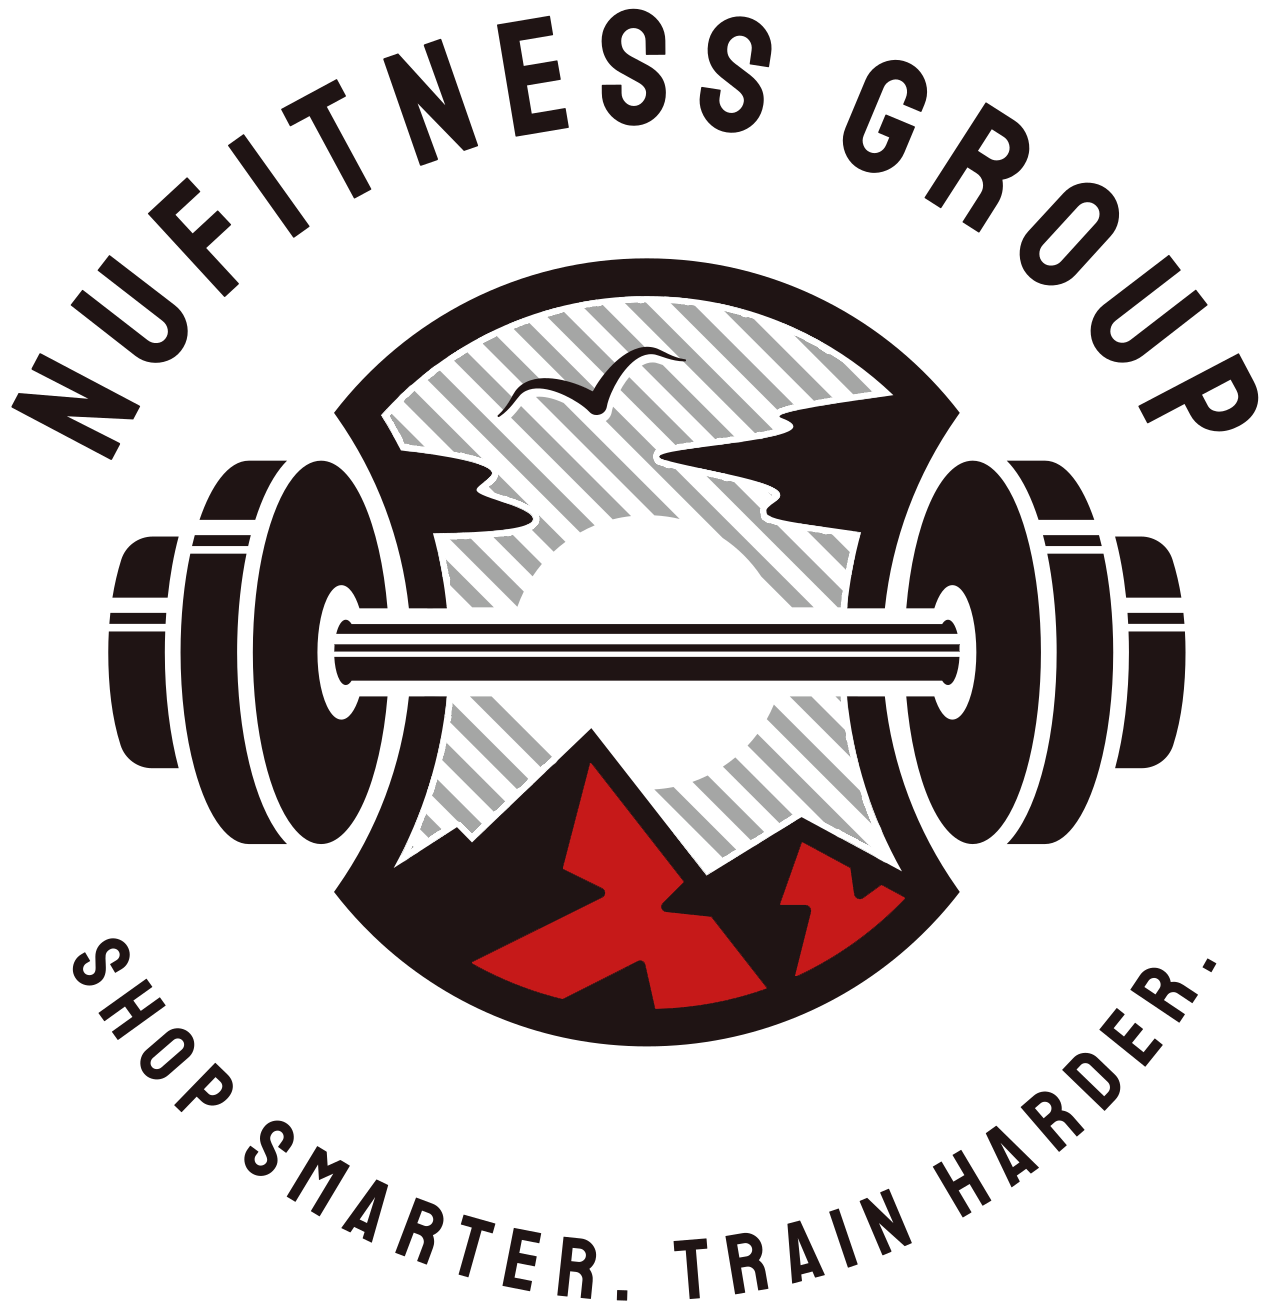 NuFitness Group